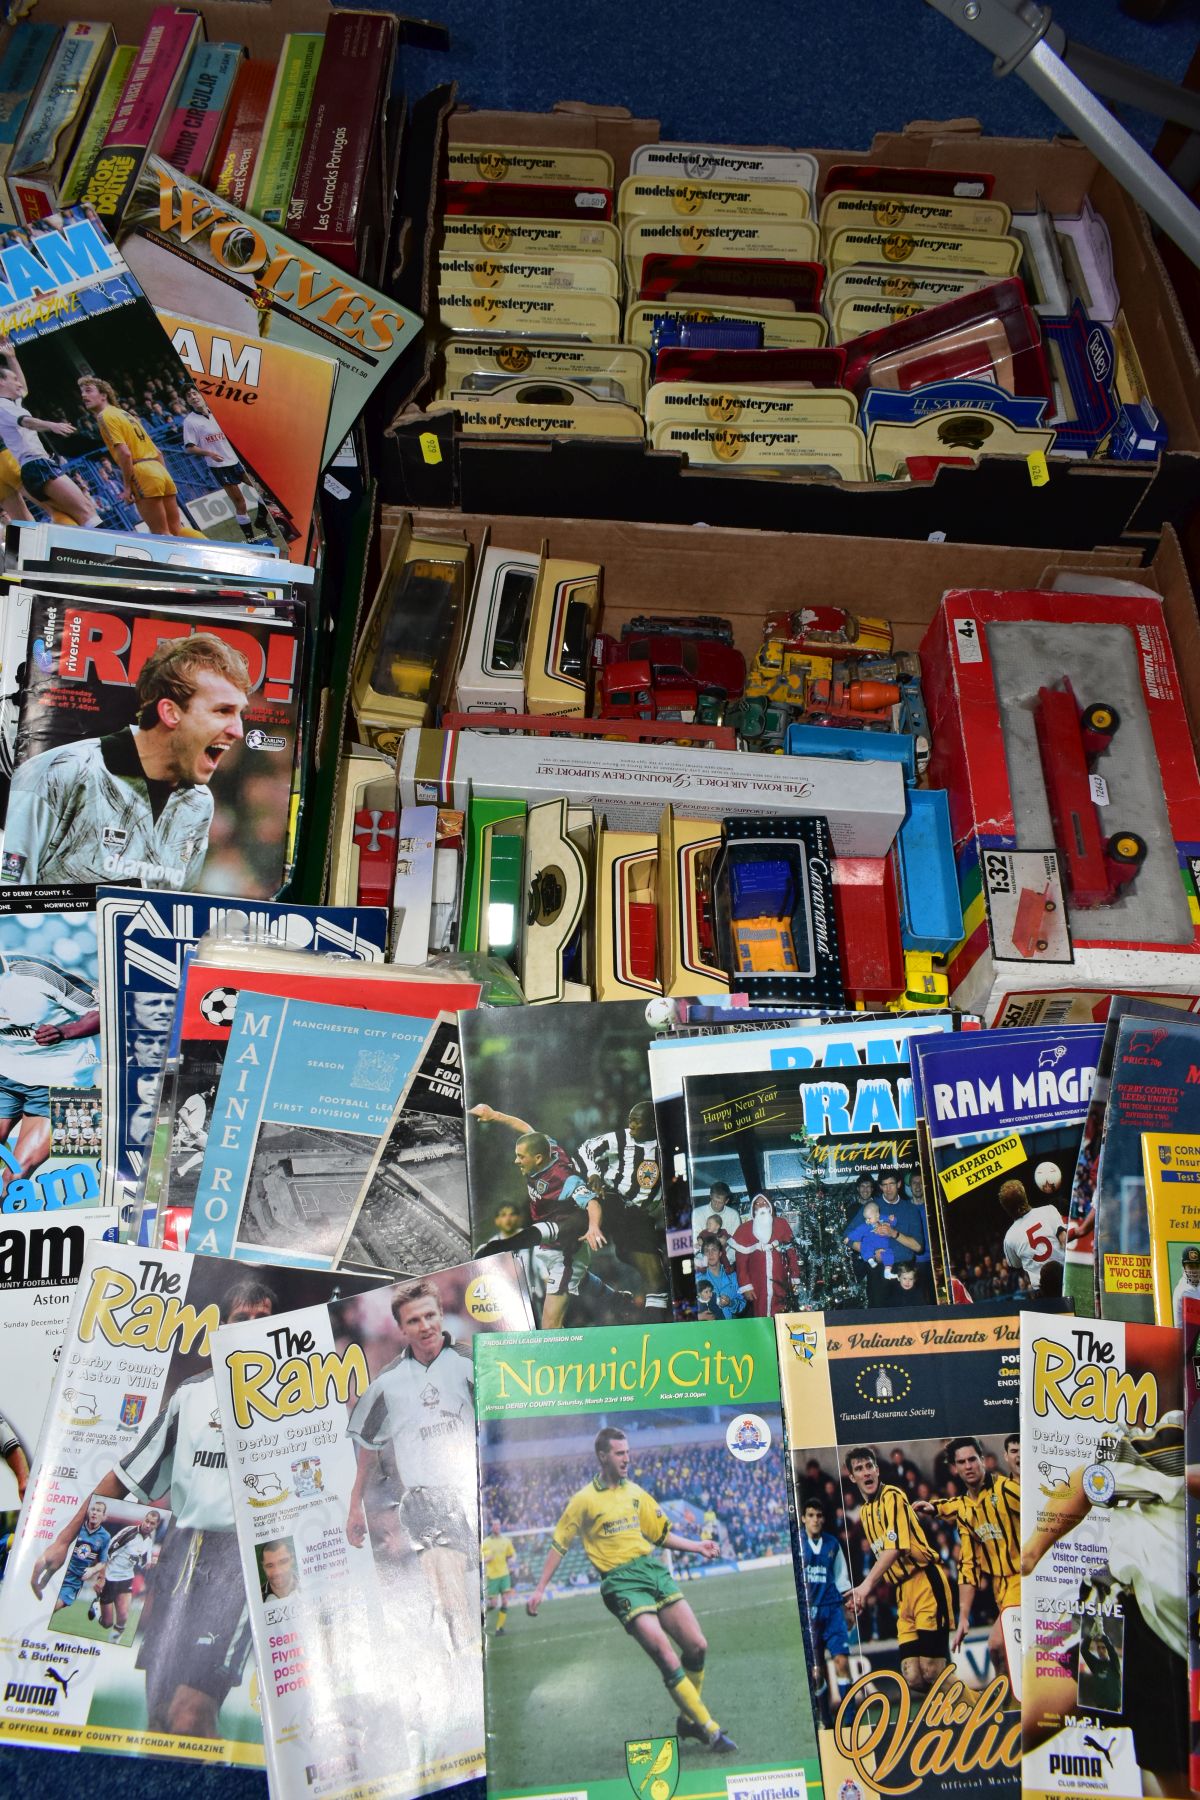 FOUR BOXES AND LOOSE DIECAST MODELS, JIGSAWS & FOOTBALL PROGRAMMES, approximately 55 Diecast Models,